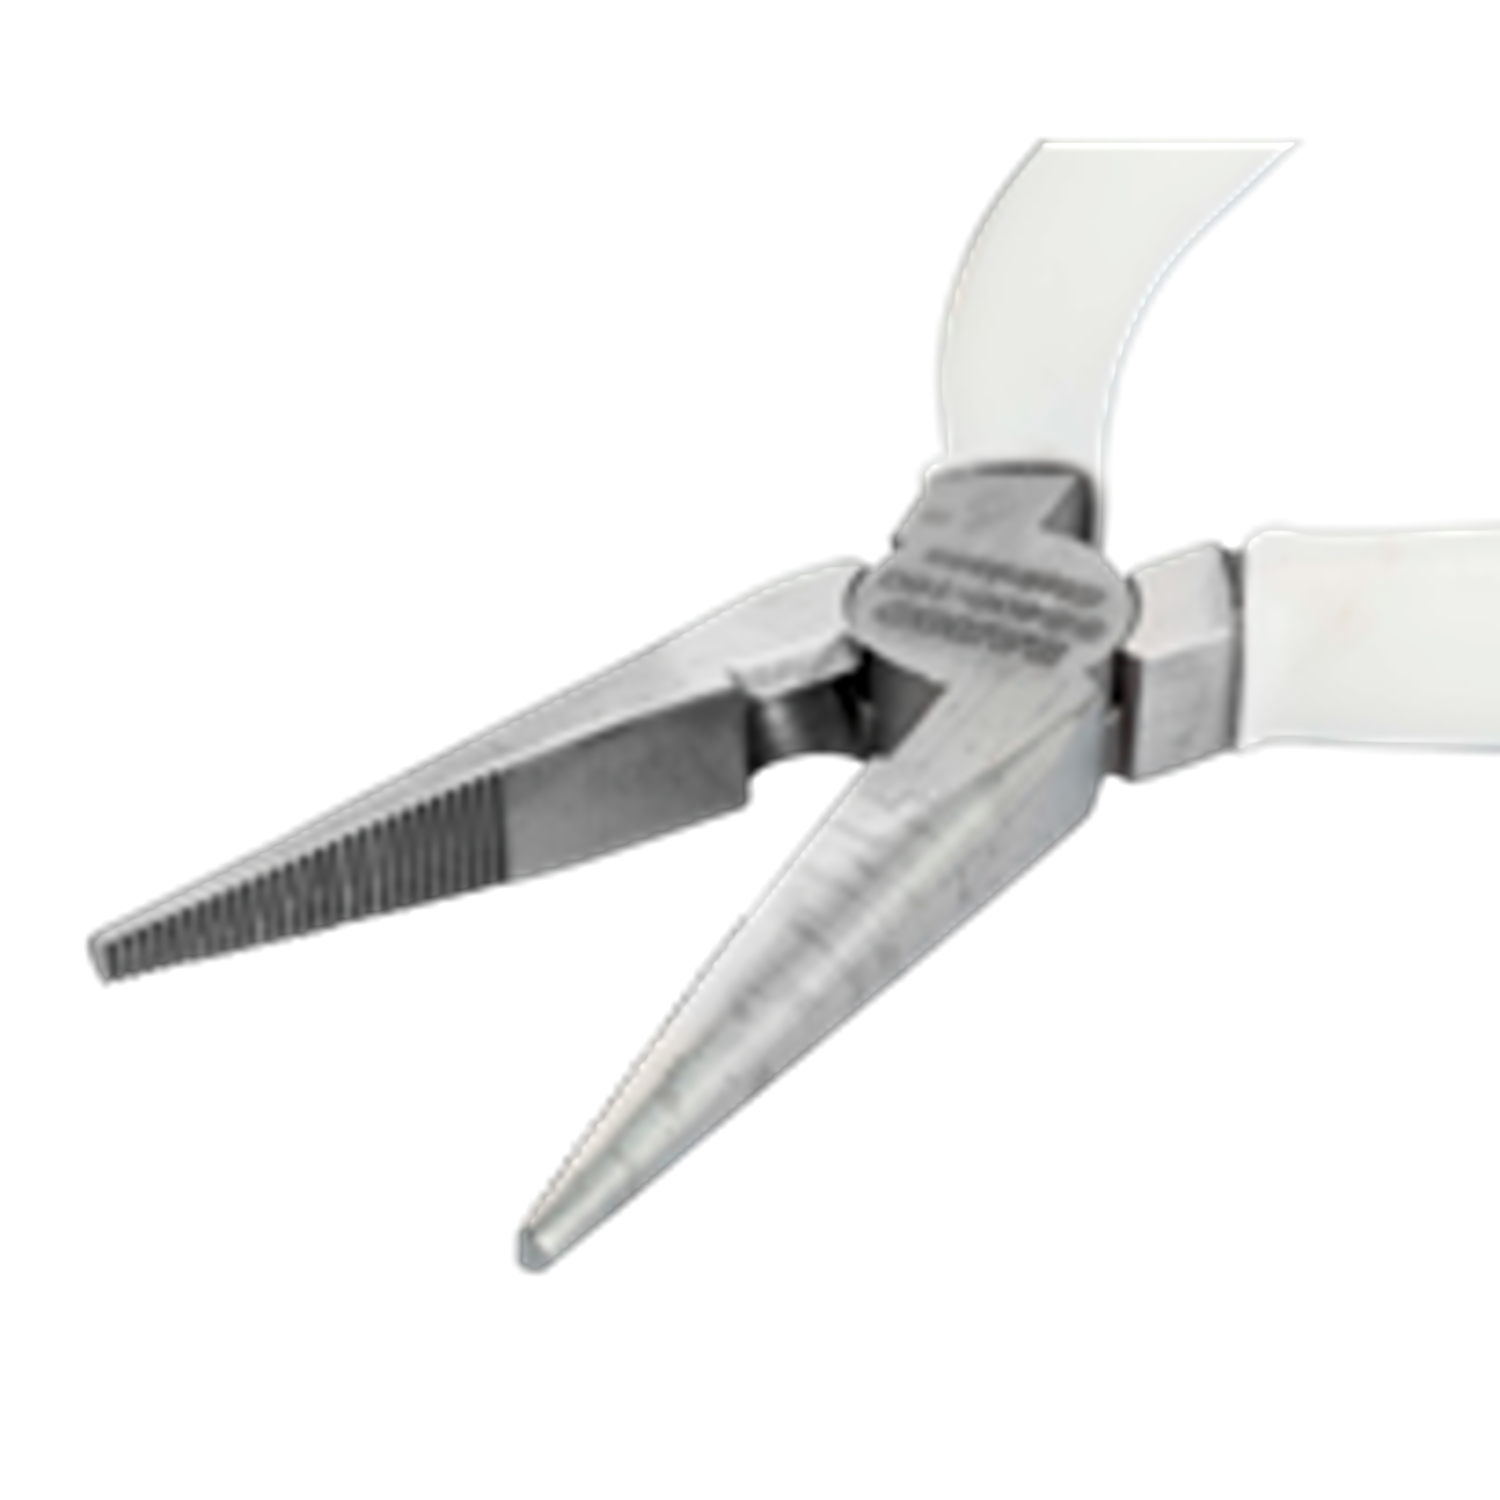 BAHCO SS406 Snipe Nose Plier with PVC Coated Handles - Premium Snipe Nose Plier from BAHCO - Shop now at Yew Aik.